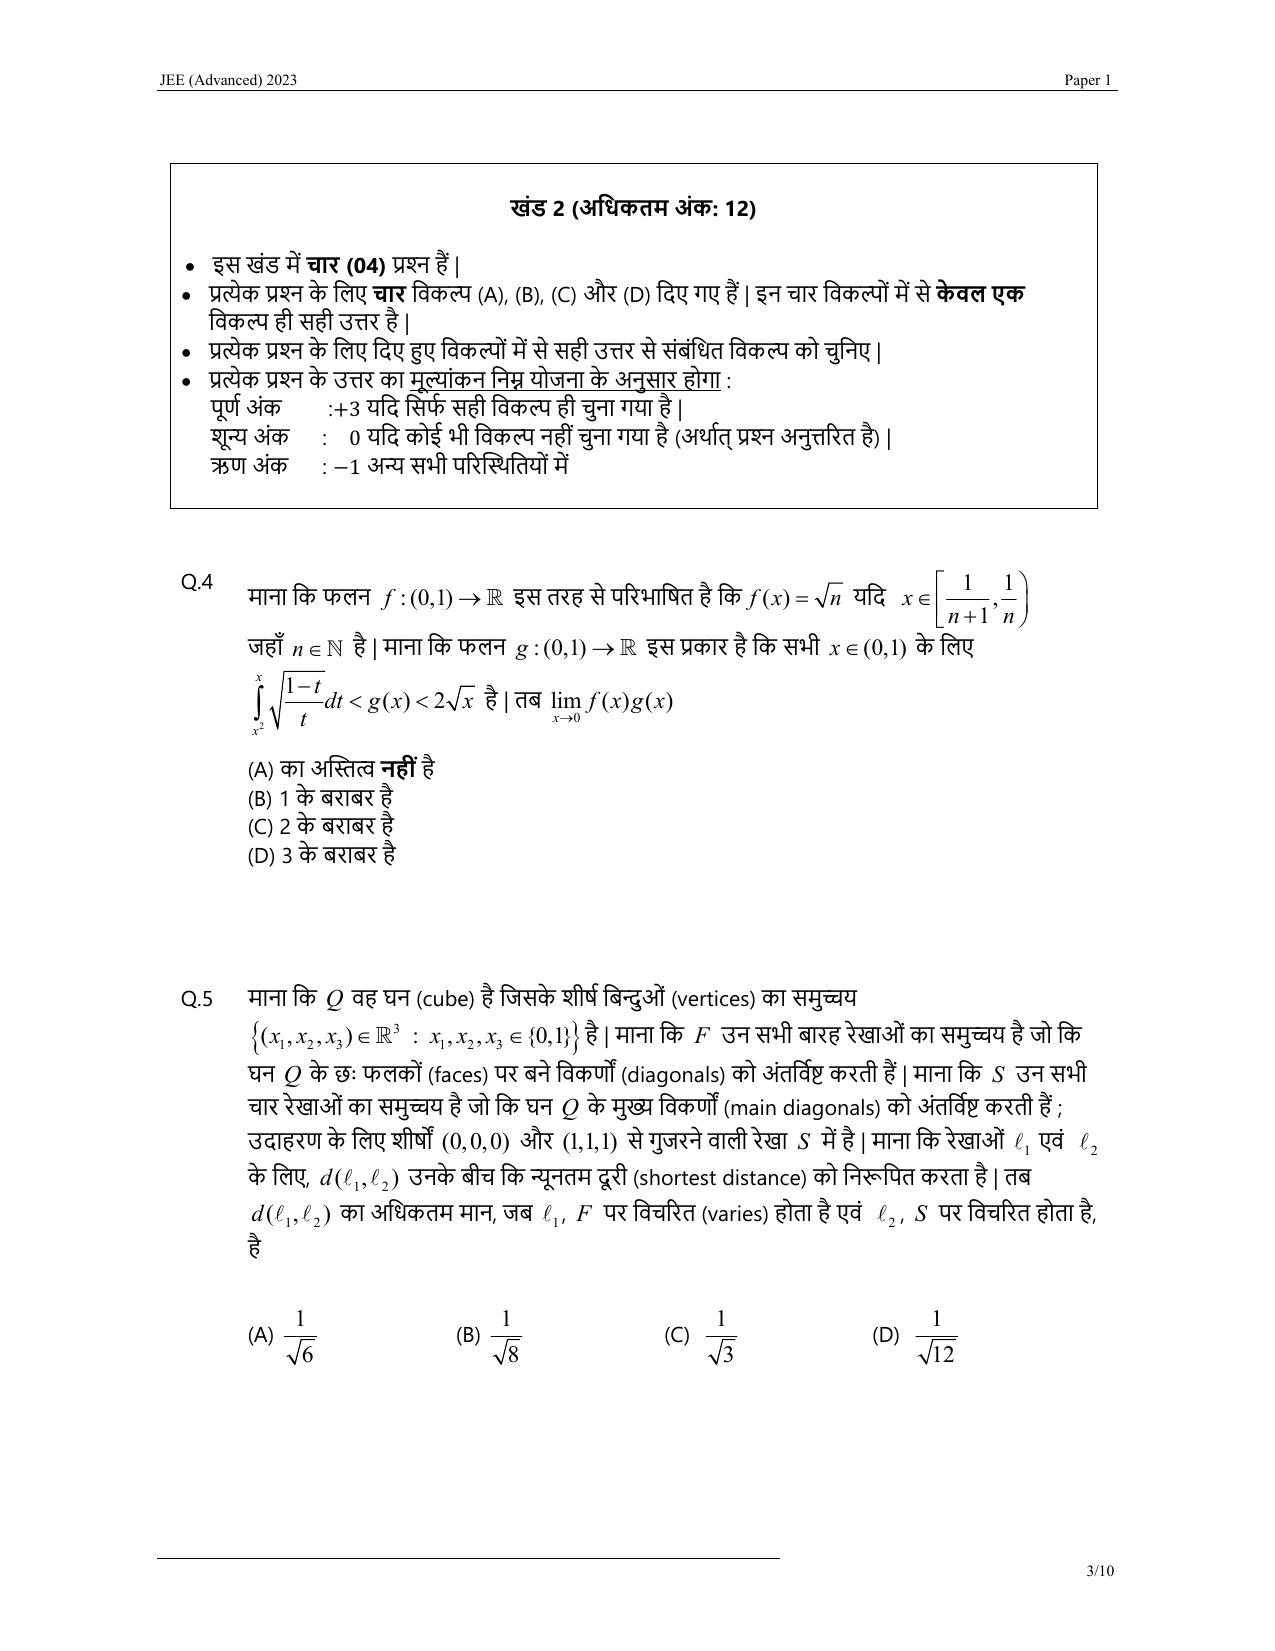 JEE Advanced 2023 Question Paper 1 (Hindi) - Page 3